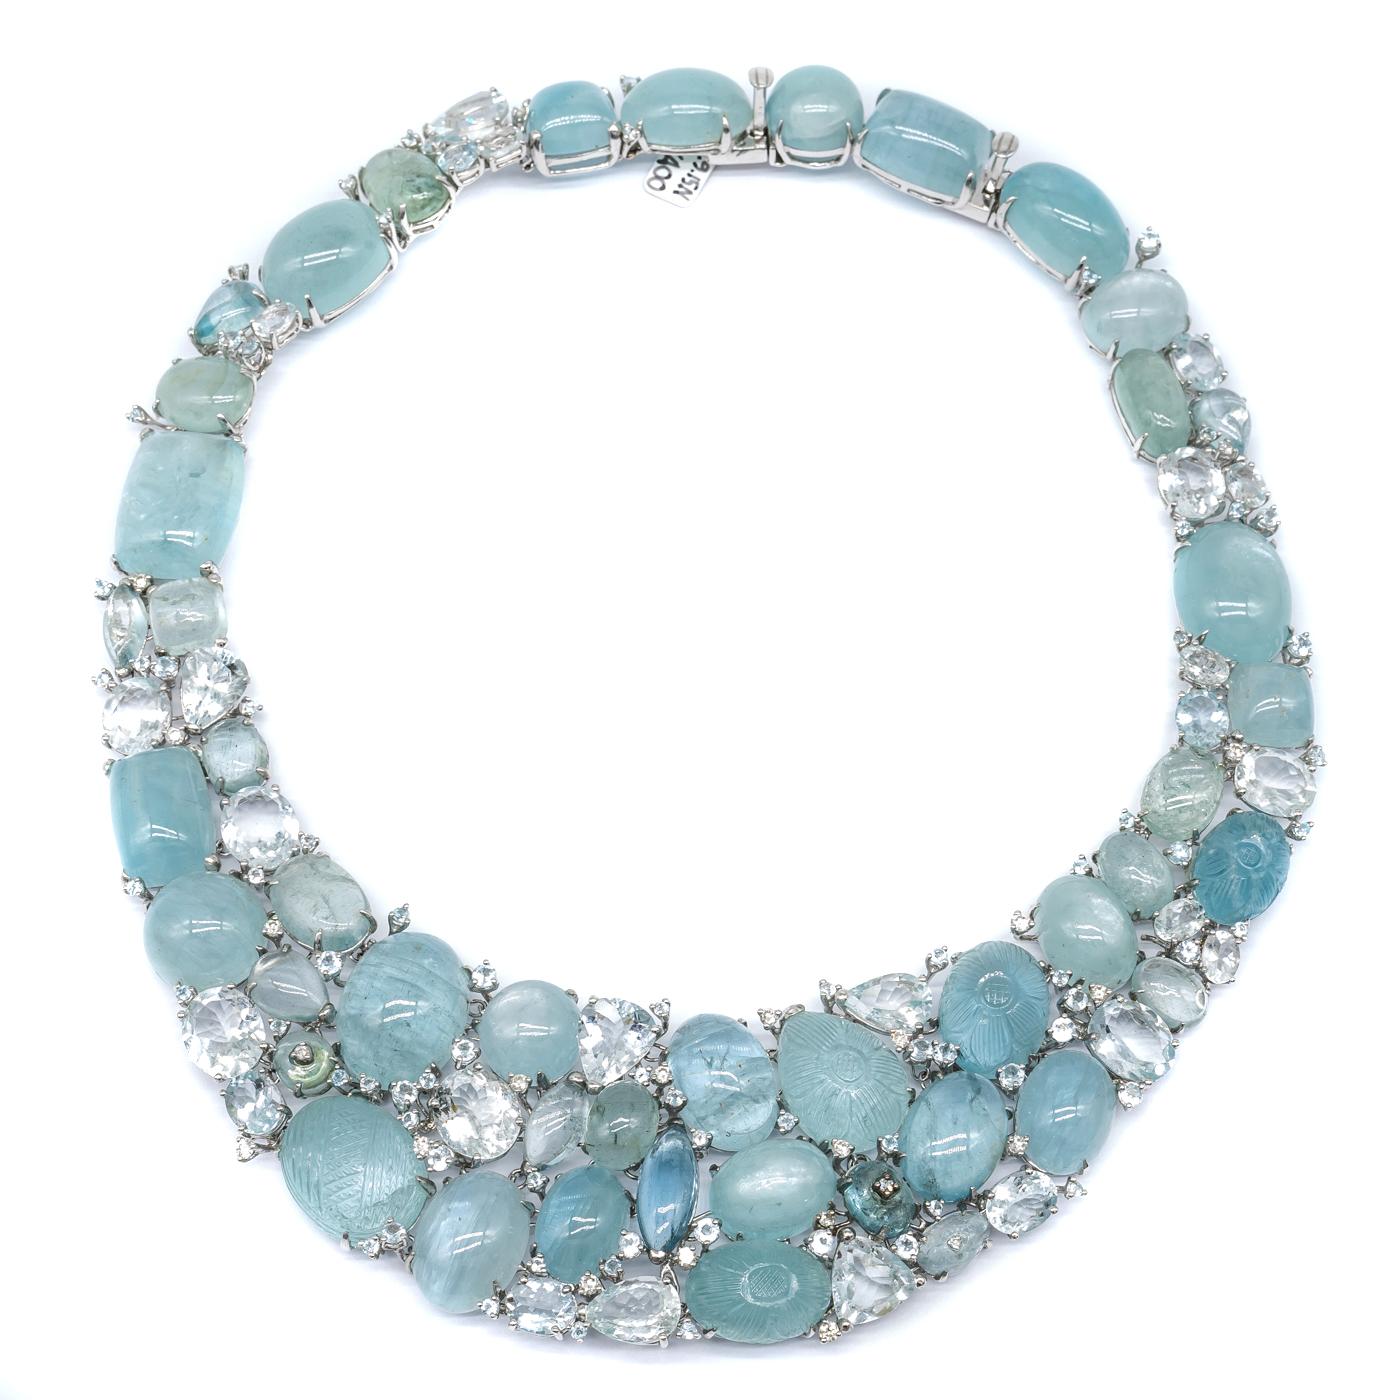 A Moira Design, fine, multi stone aquamarine necklace, set with mixed cuts of faceted and cabochon aquamarines, weighing an estimated total of 560.00ct, with 1.13ct of round brilliant-cut diamonds, mounted in 18ct white gold. With a push-in tongue